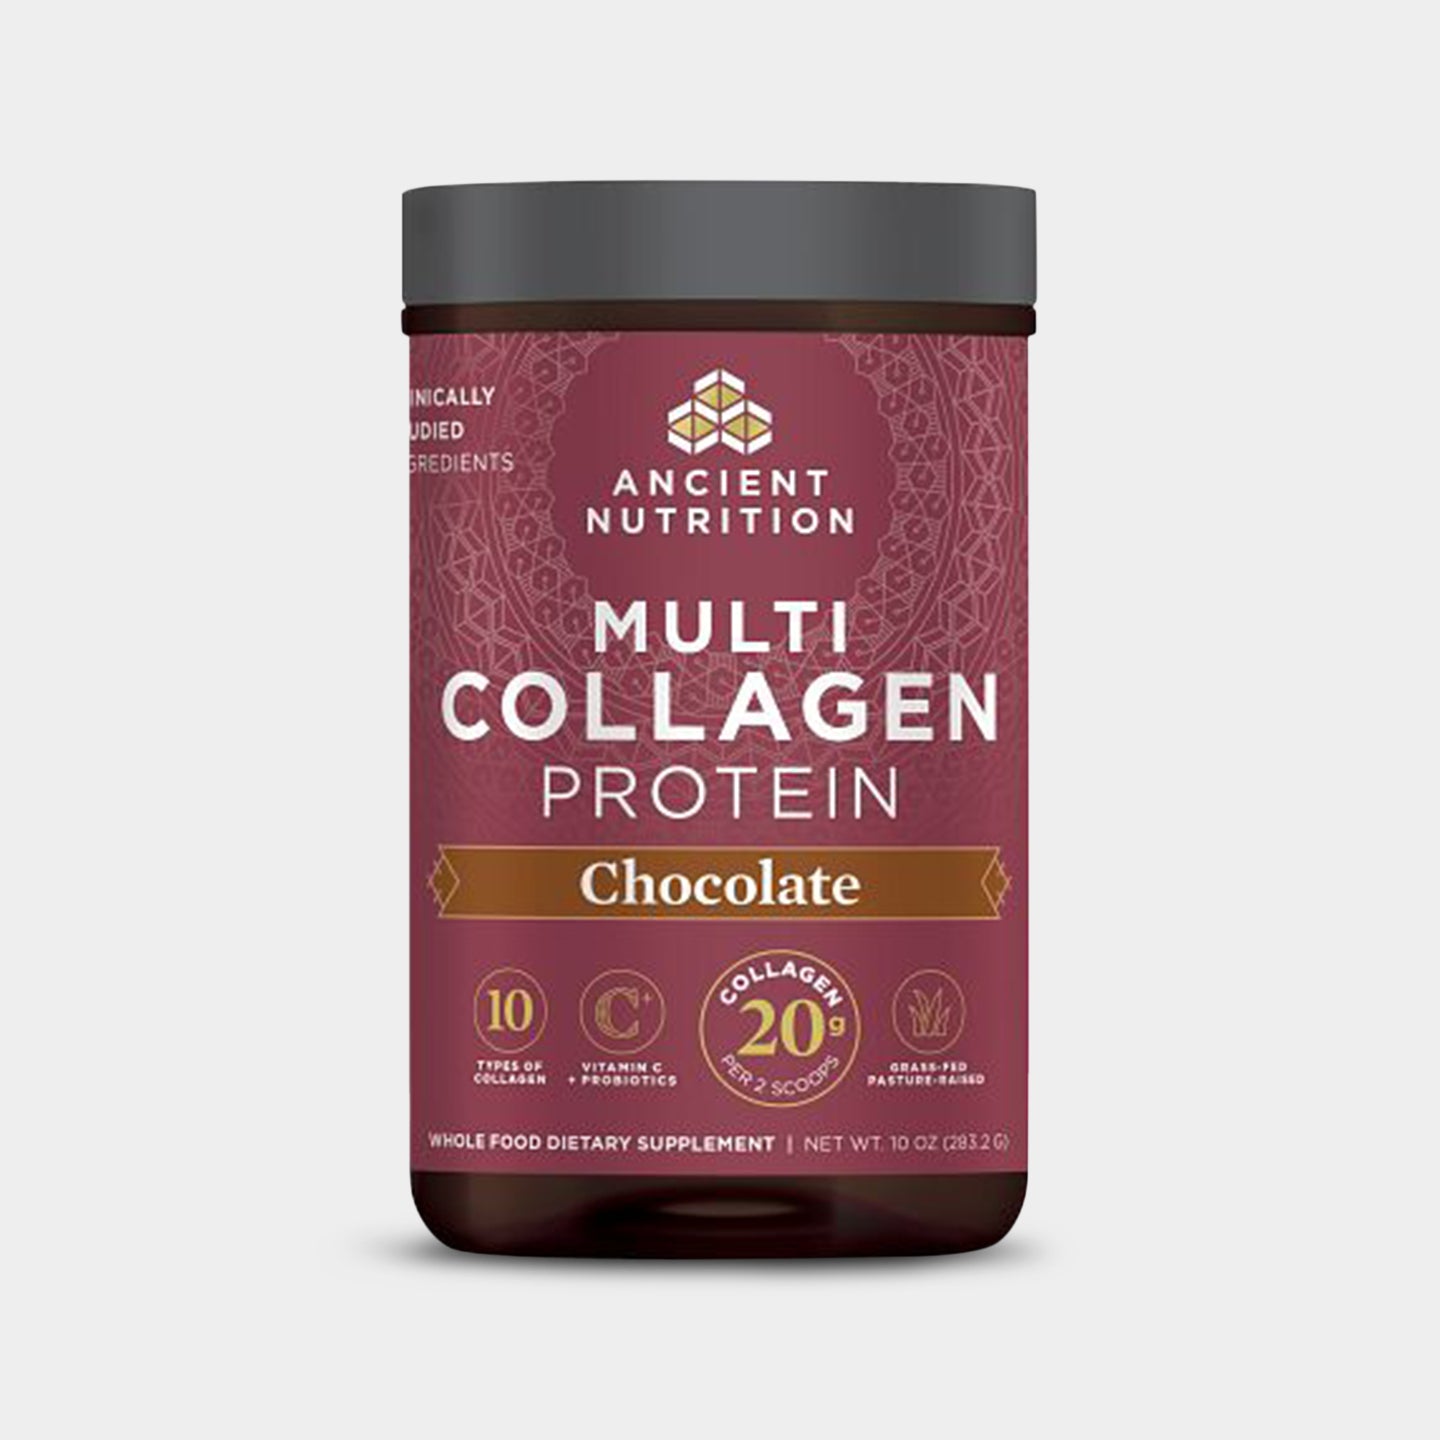 Ancient Nutrition Multi Collagen Protein - 20g, Chocolate, 24 Servings A1